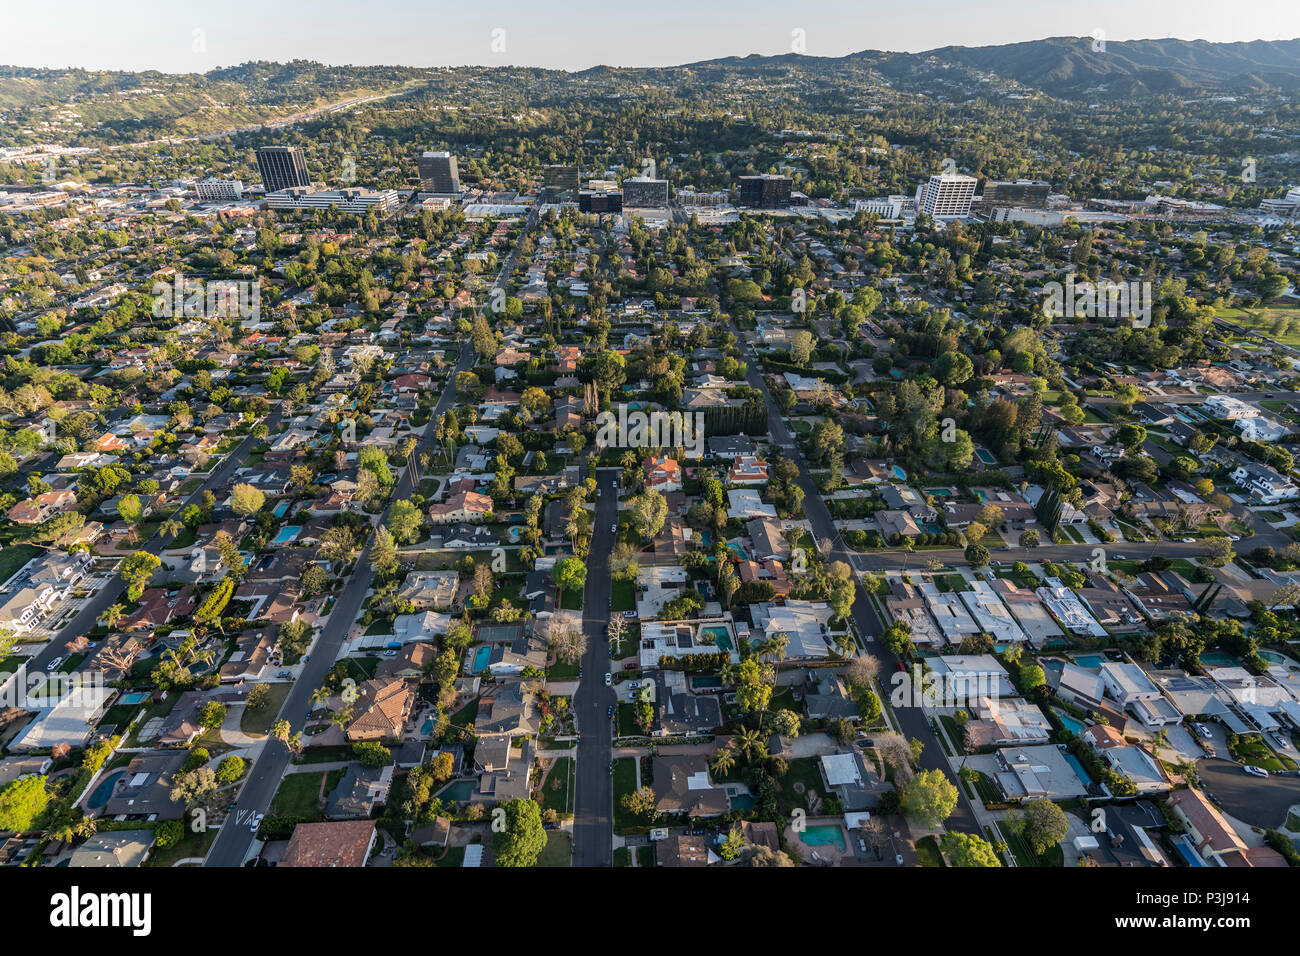 Afternoon aerial view of Sherman Oaks neighborhood in the San Fernando Valley area of Los Angeles California. Stock Photo